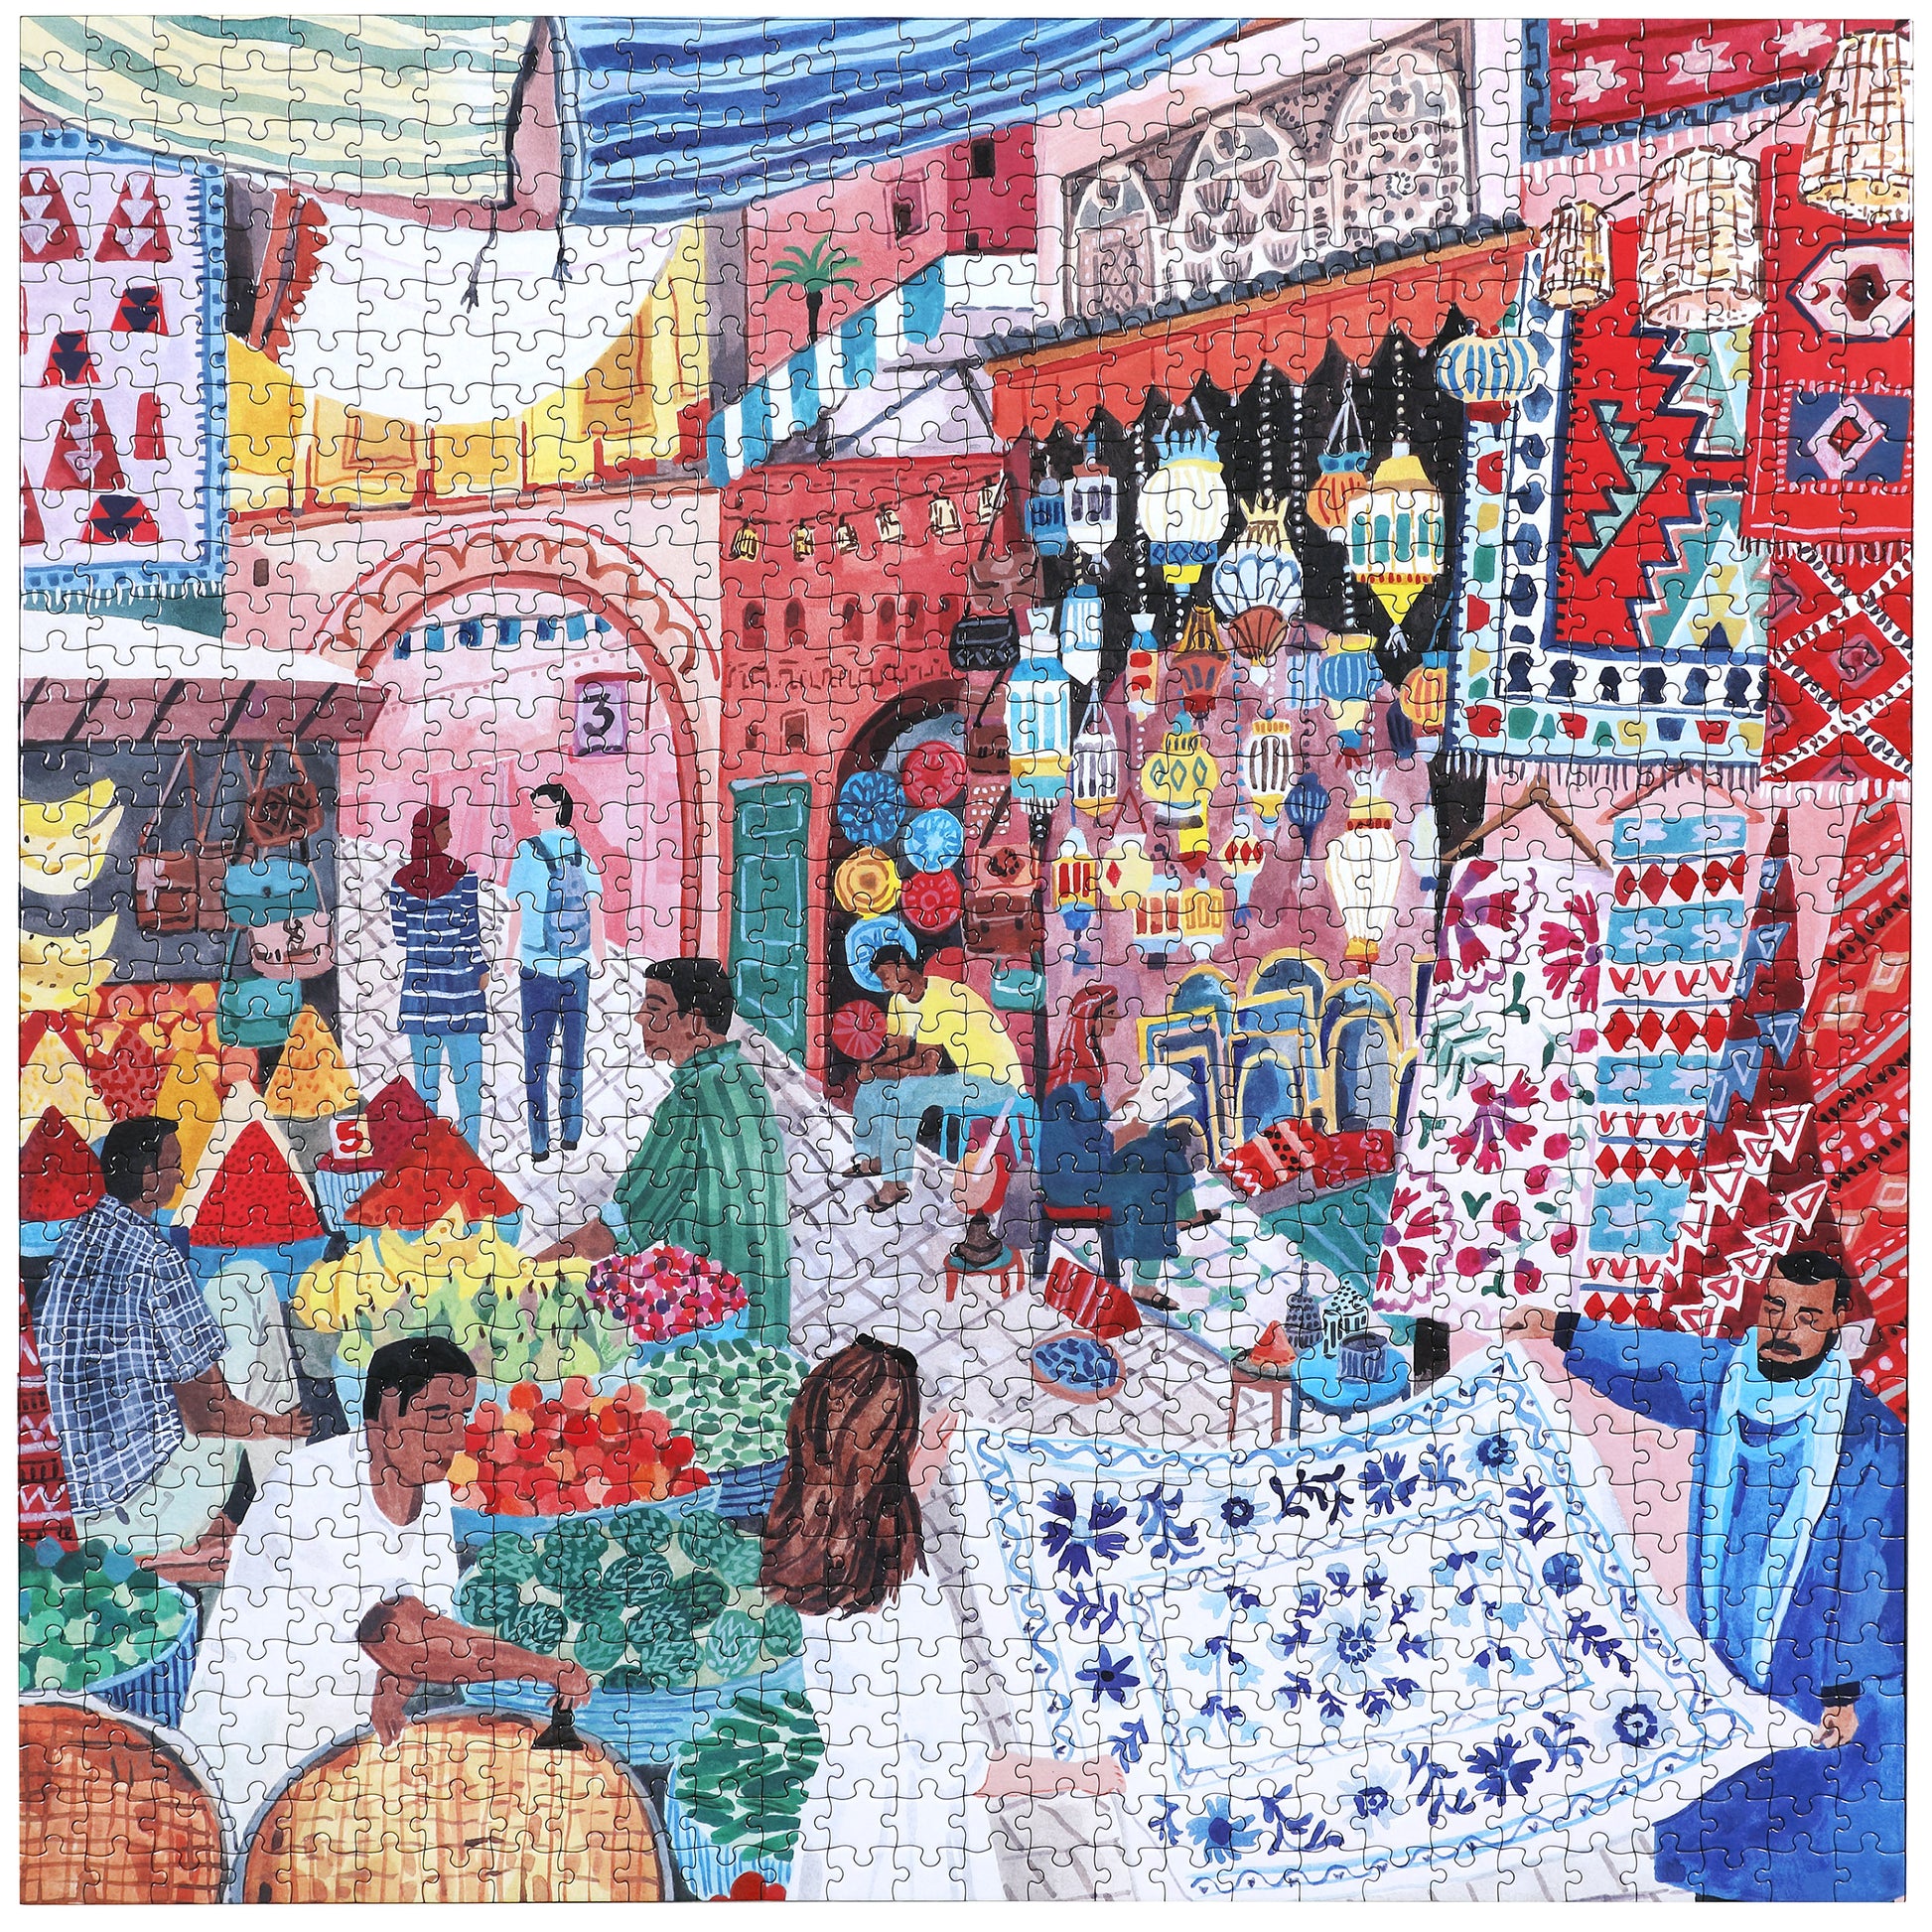 Marrakesh Morocco 1000 Piece Jigsaw Travel Puzzle | eeBoo Piece & Love | Gifts for Travel Lovers